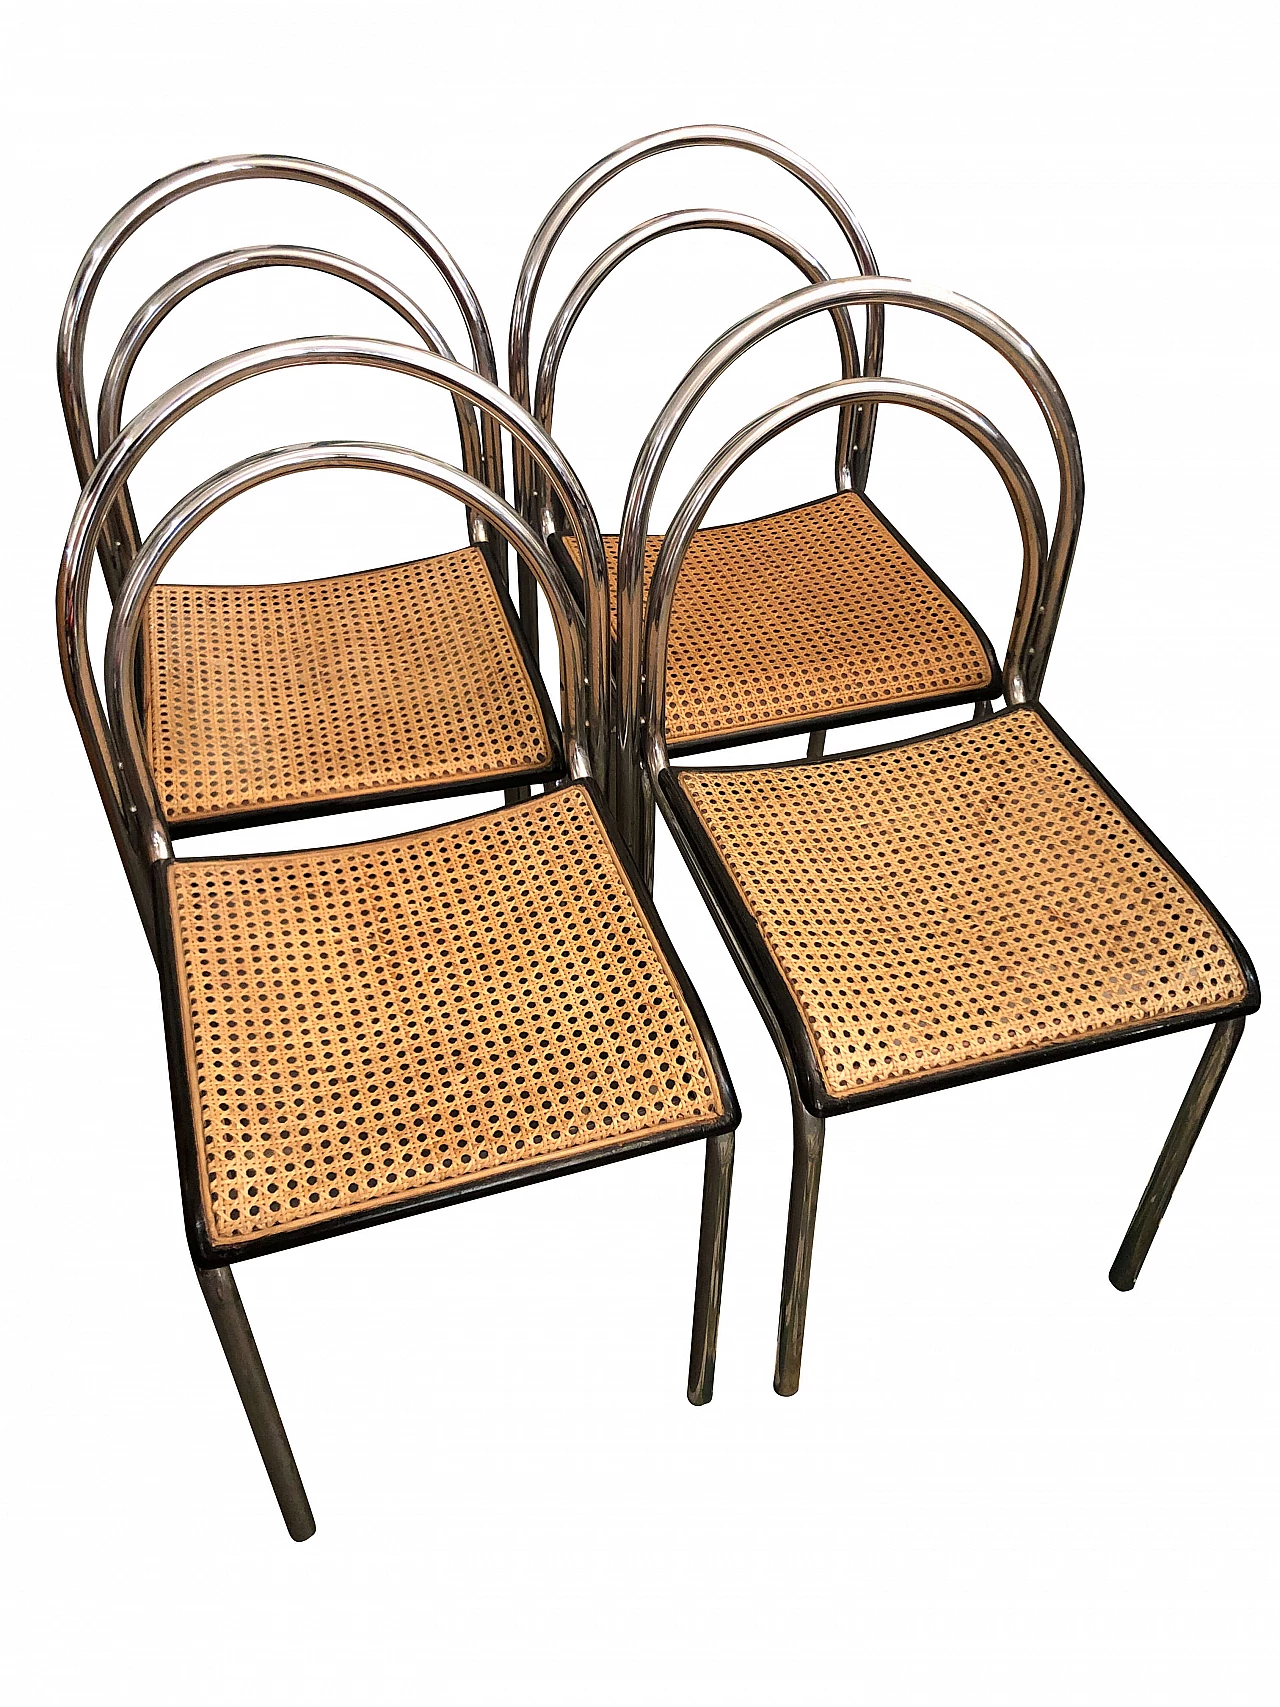 4 Chairs with straw seats in the style of Willy Rizzo, 1970s 1312727